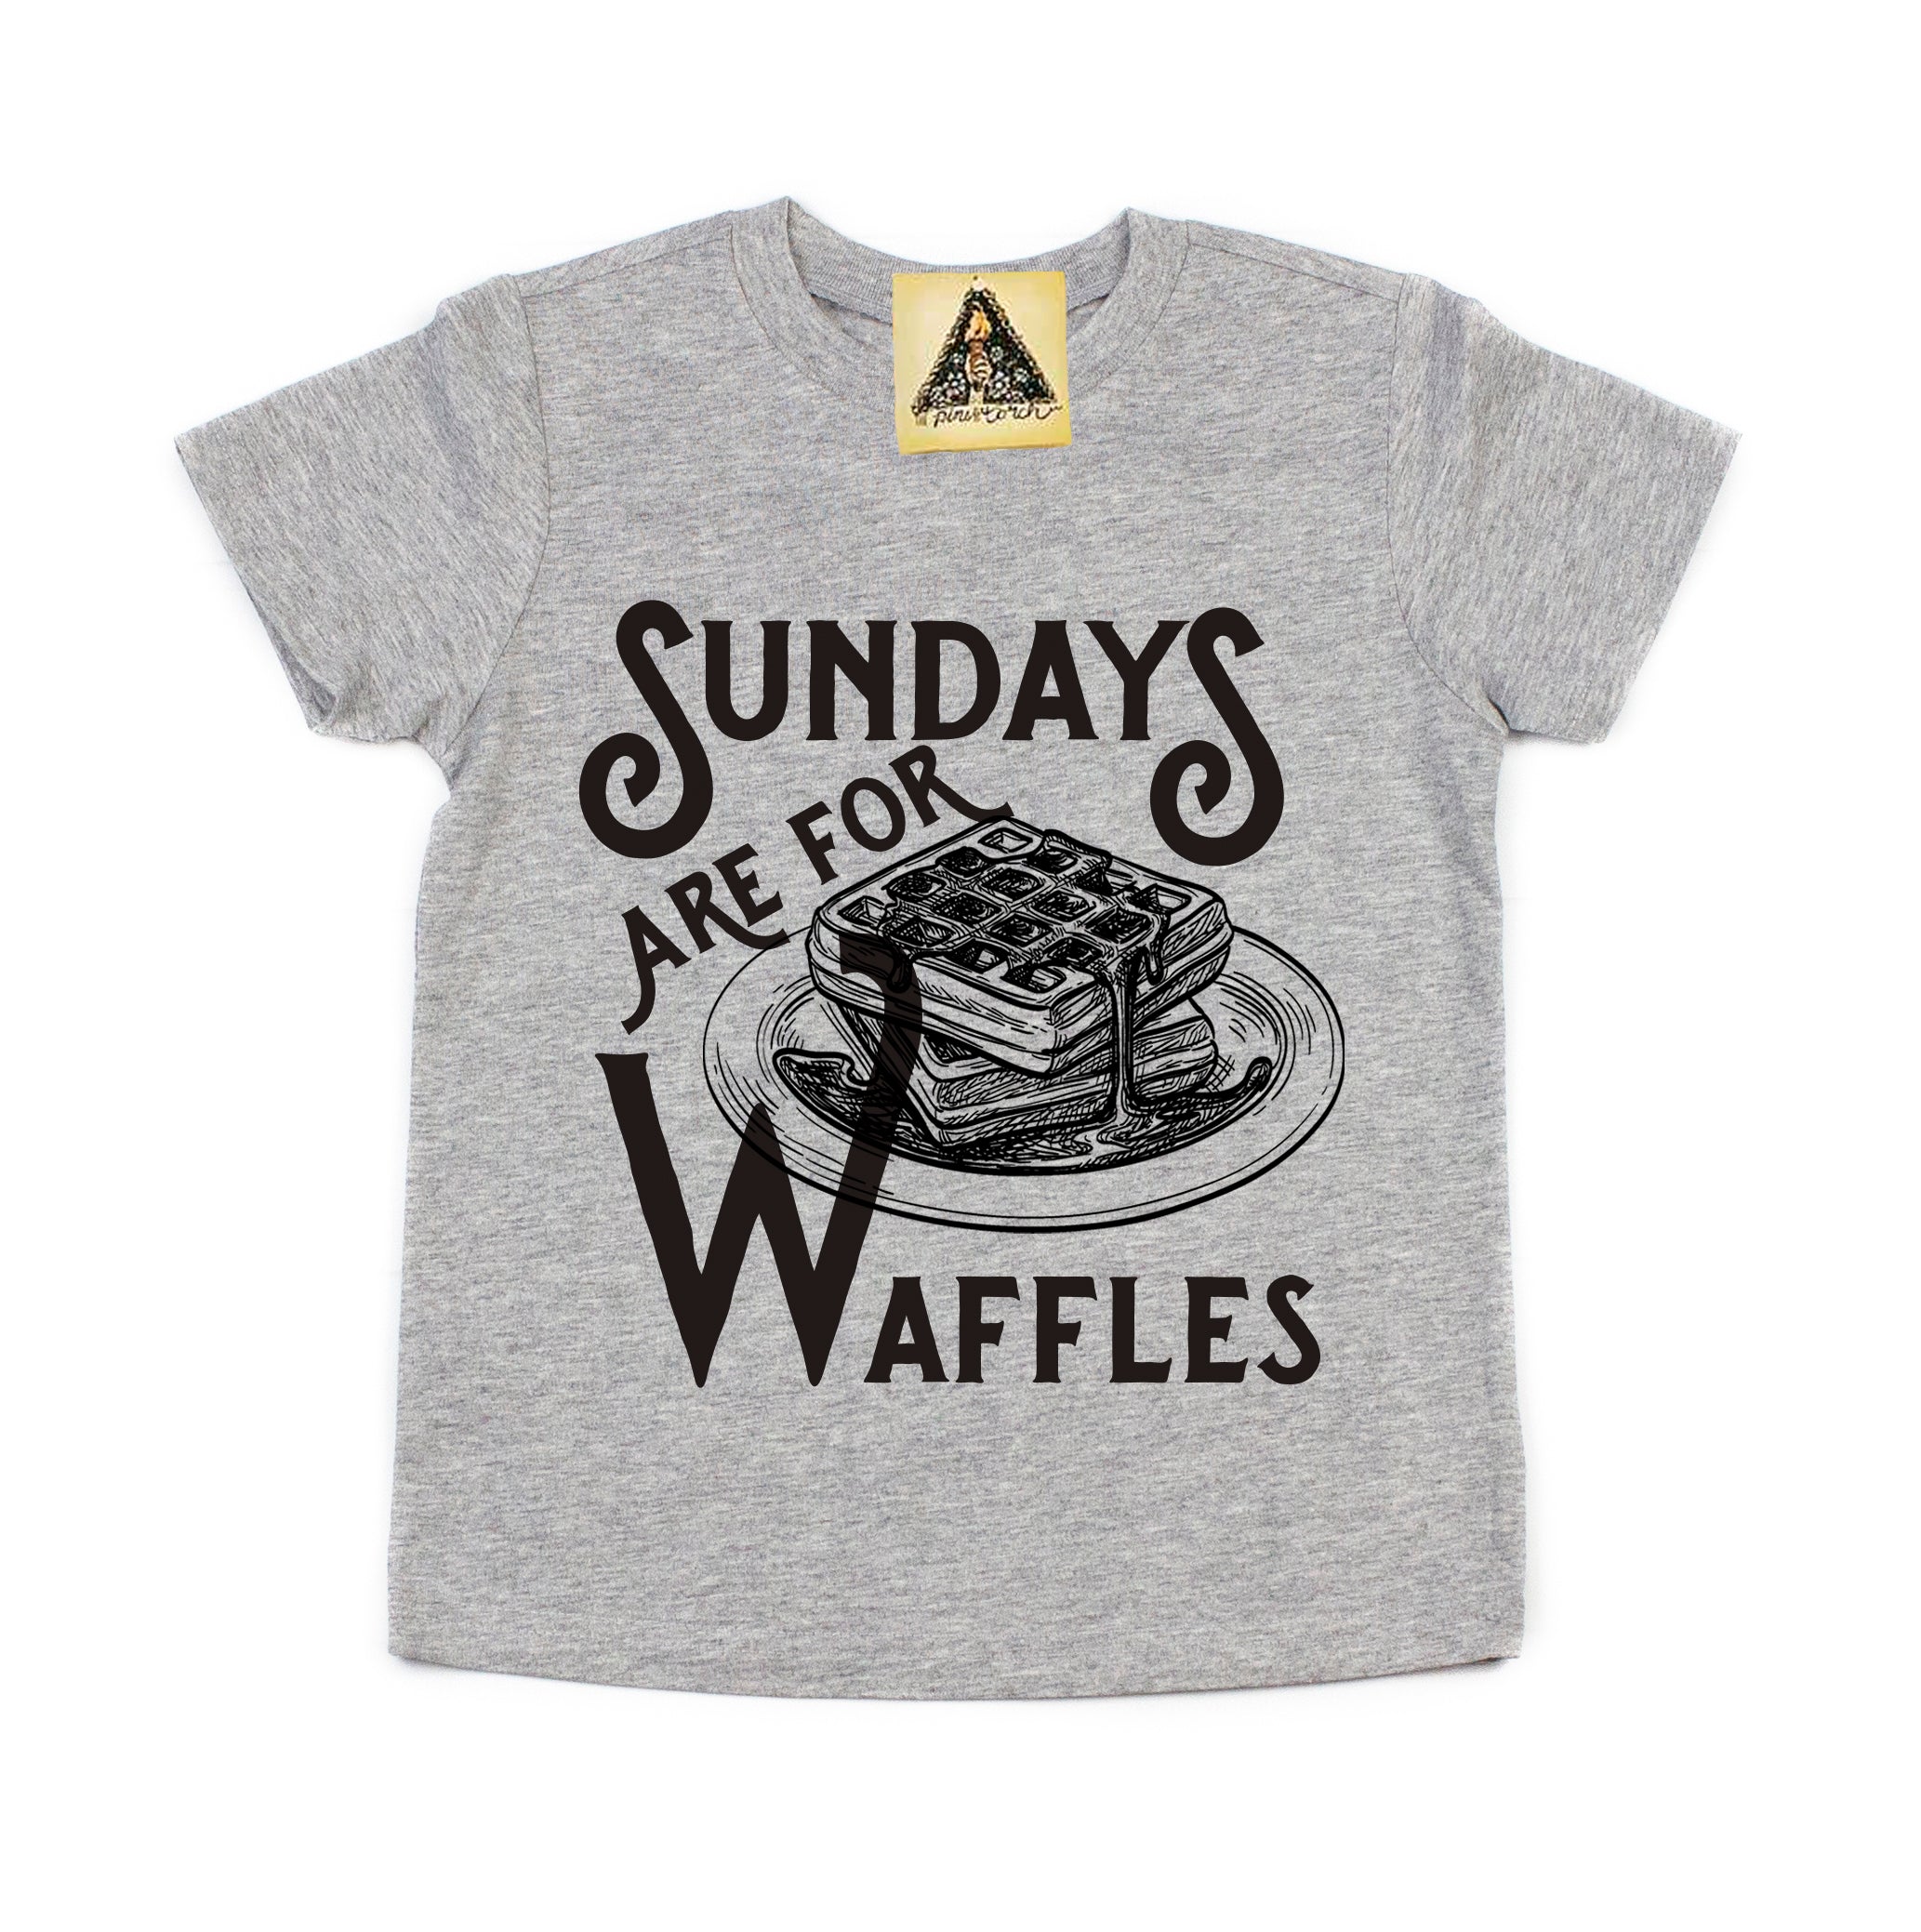 « SUNDAYS ARE FOR WAFFLES » KID'S TEE